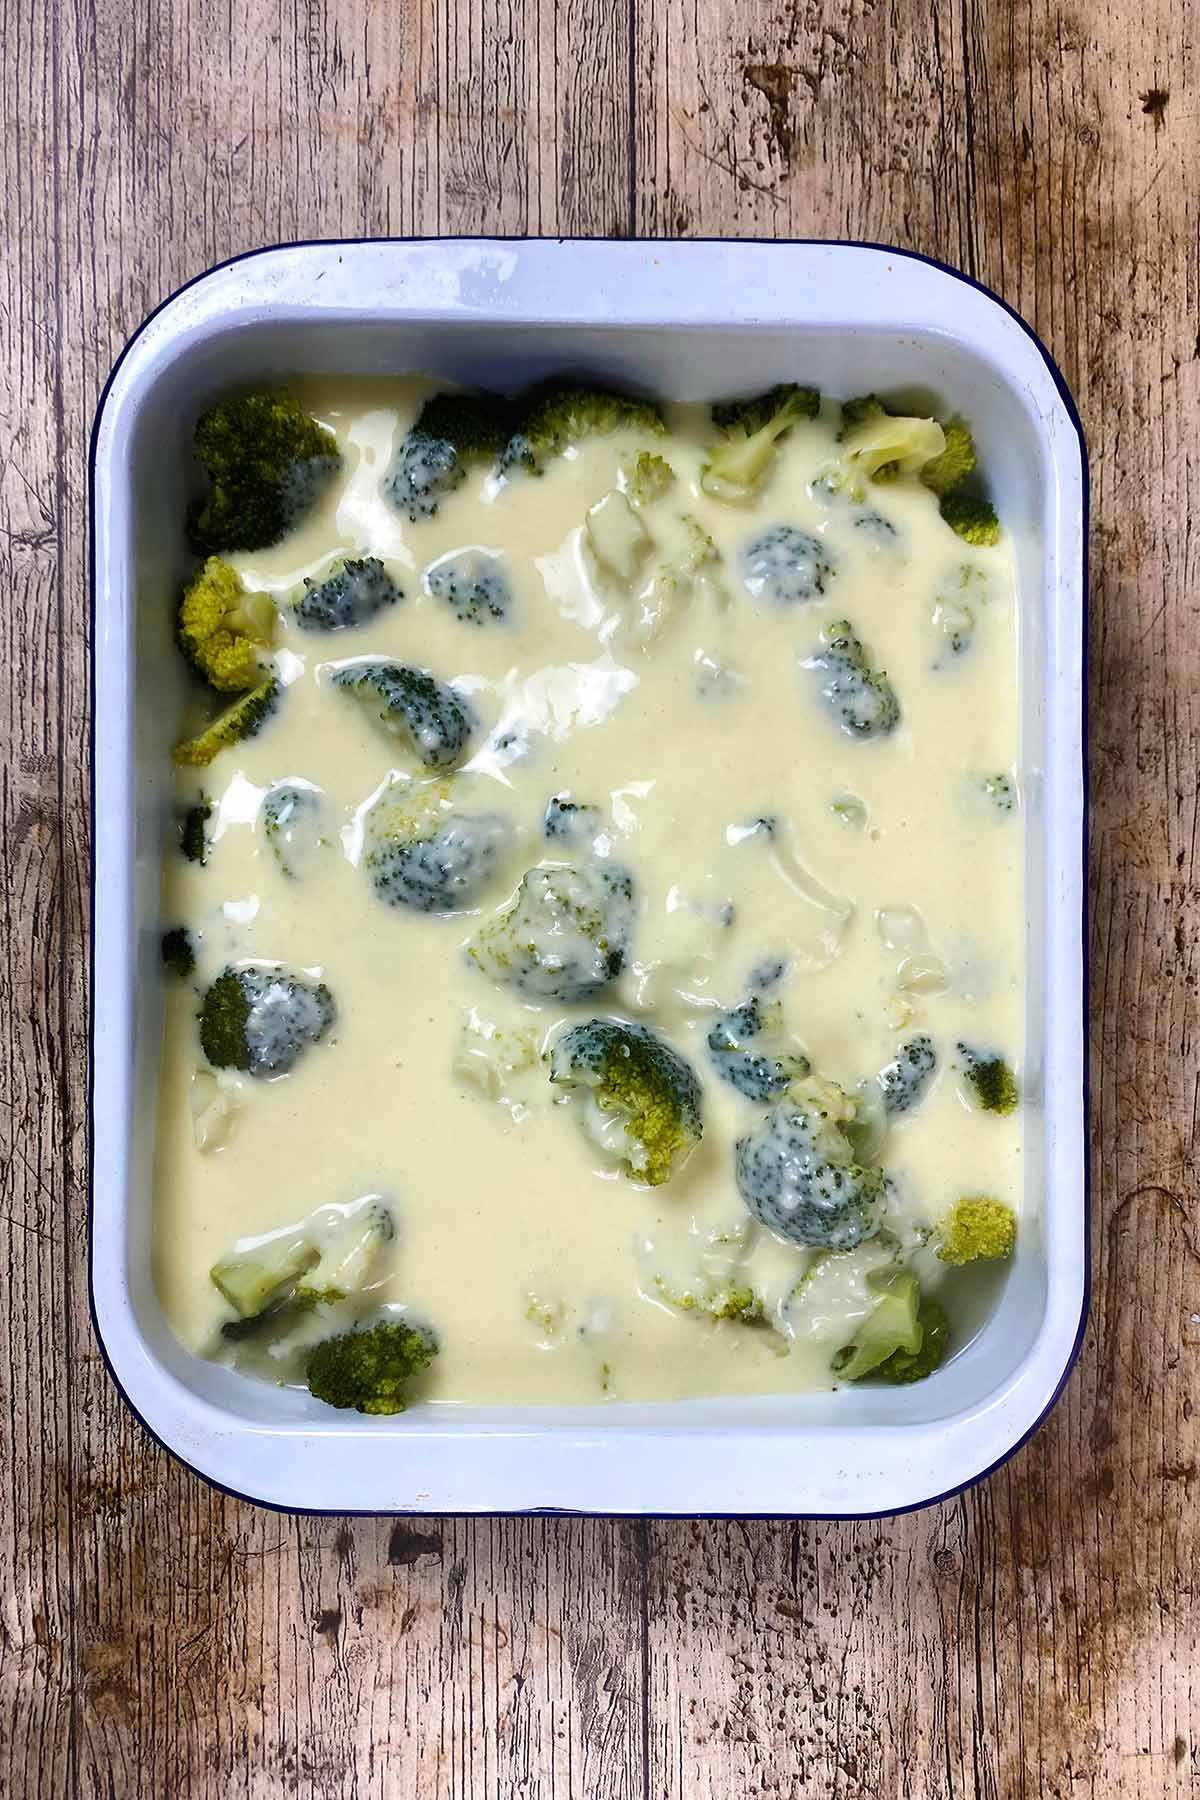 A rectangular baking dish full of broccoli florets covered in cheese sauce.